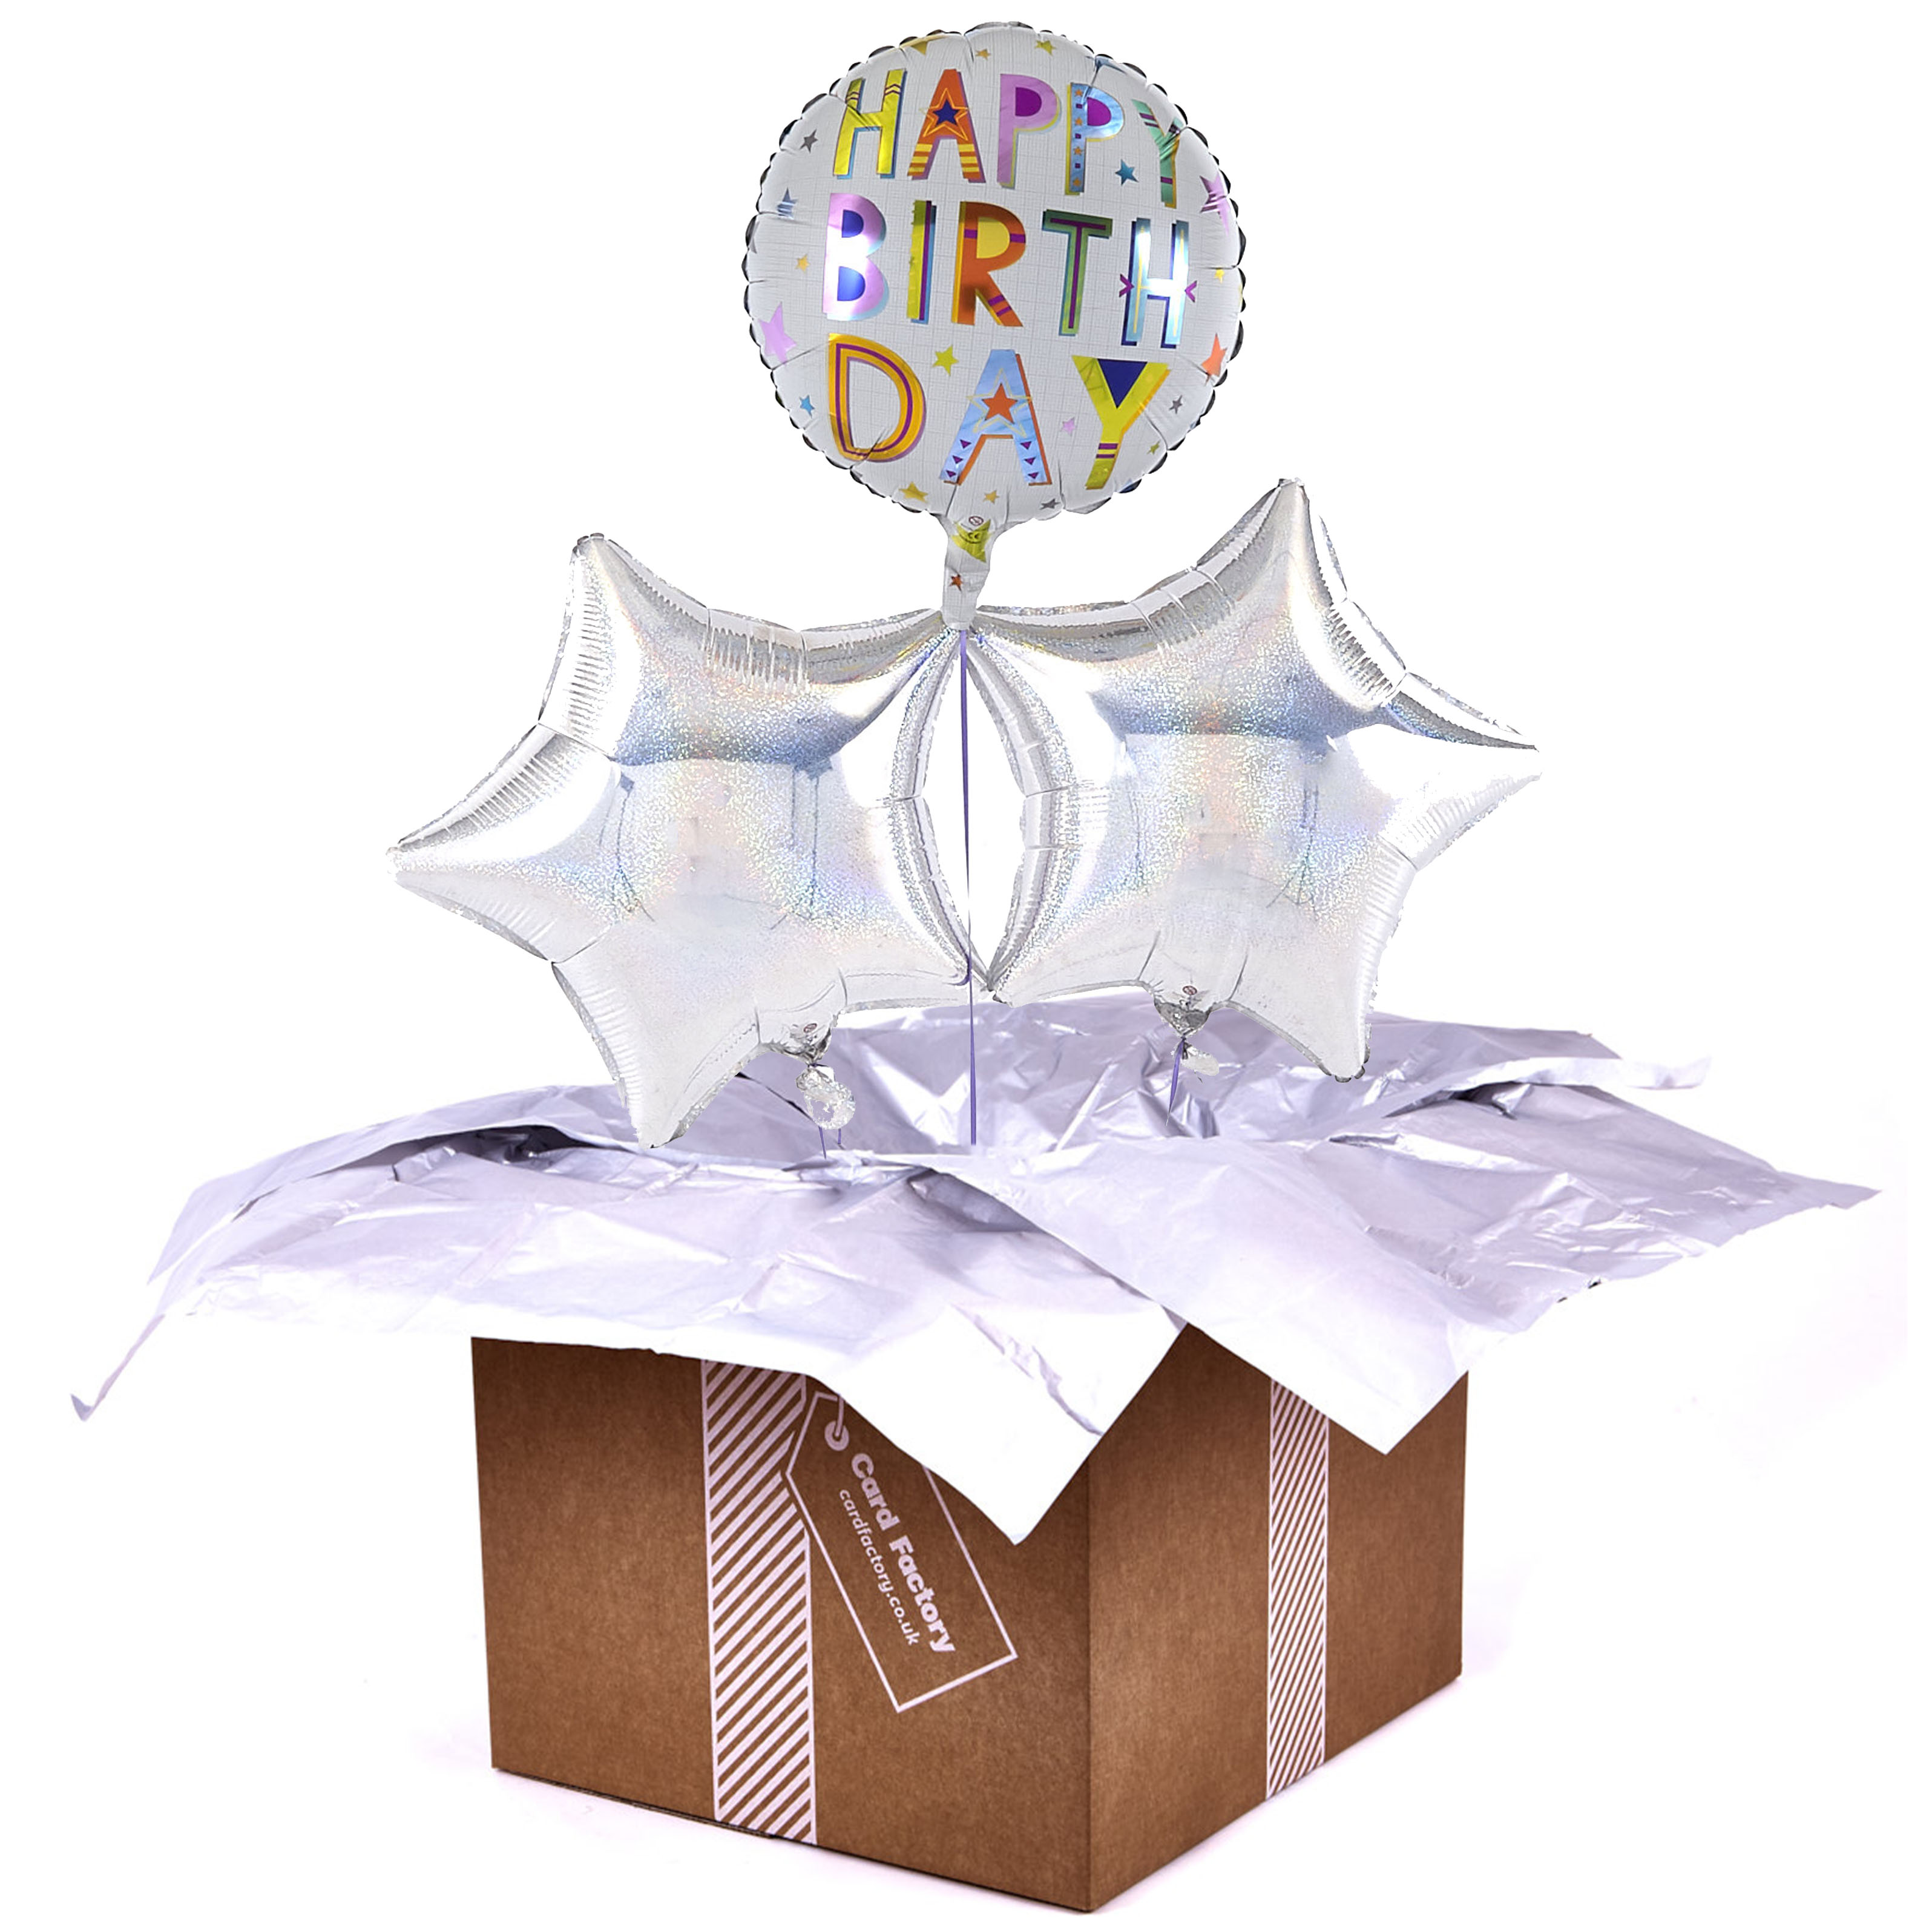 Happy Birthday Square Text Silver Balloon Bouquet - DELIVERED INFLATED!